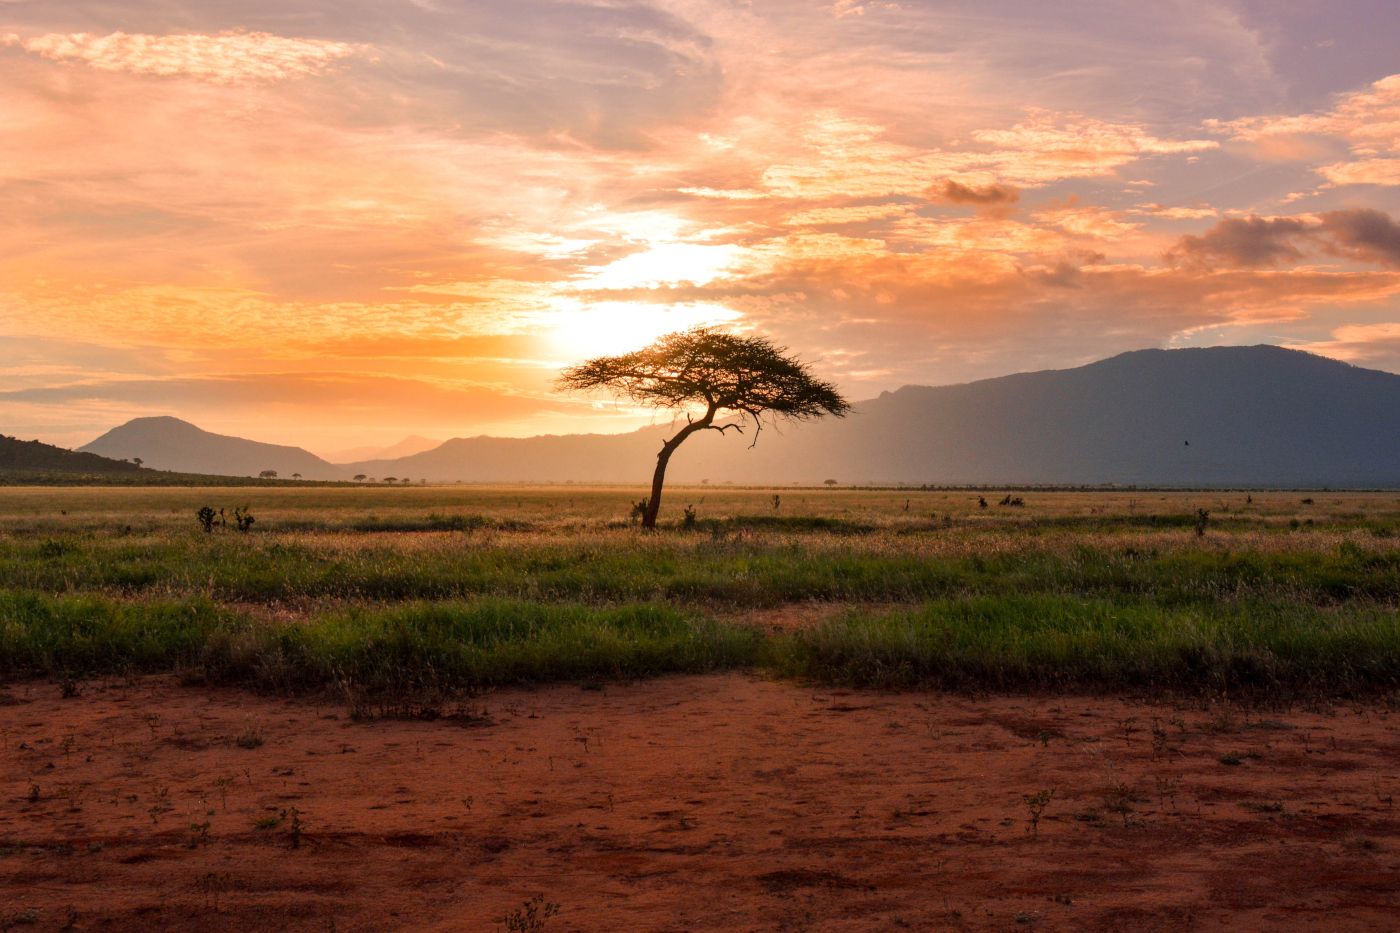 Tree in Kenyan plain with mountain in the background